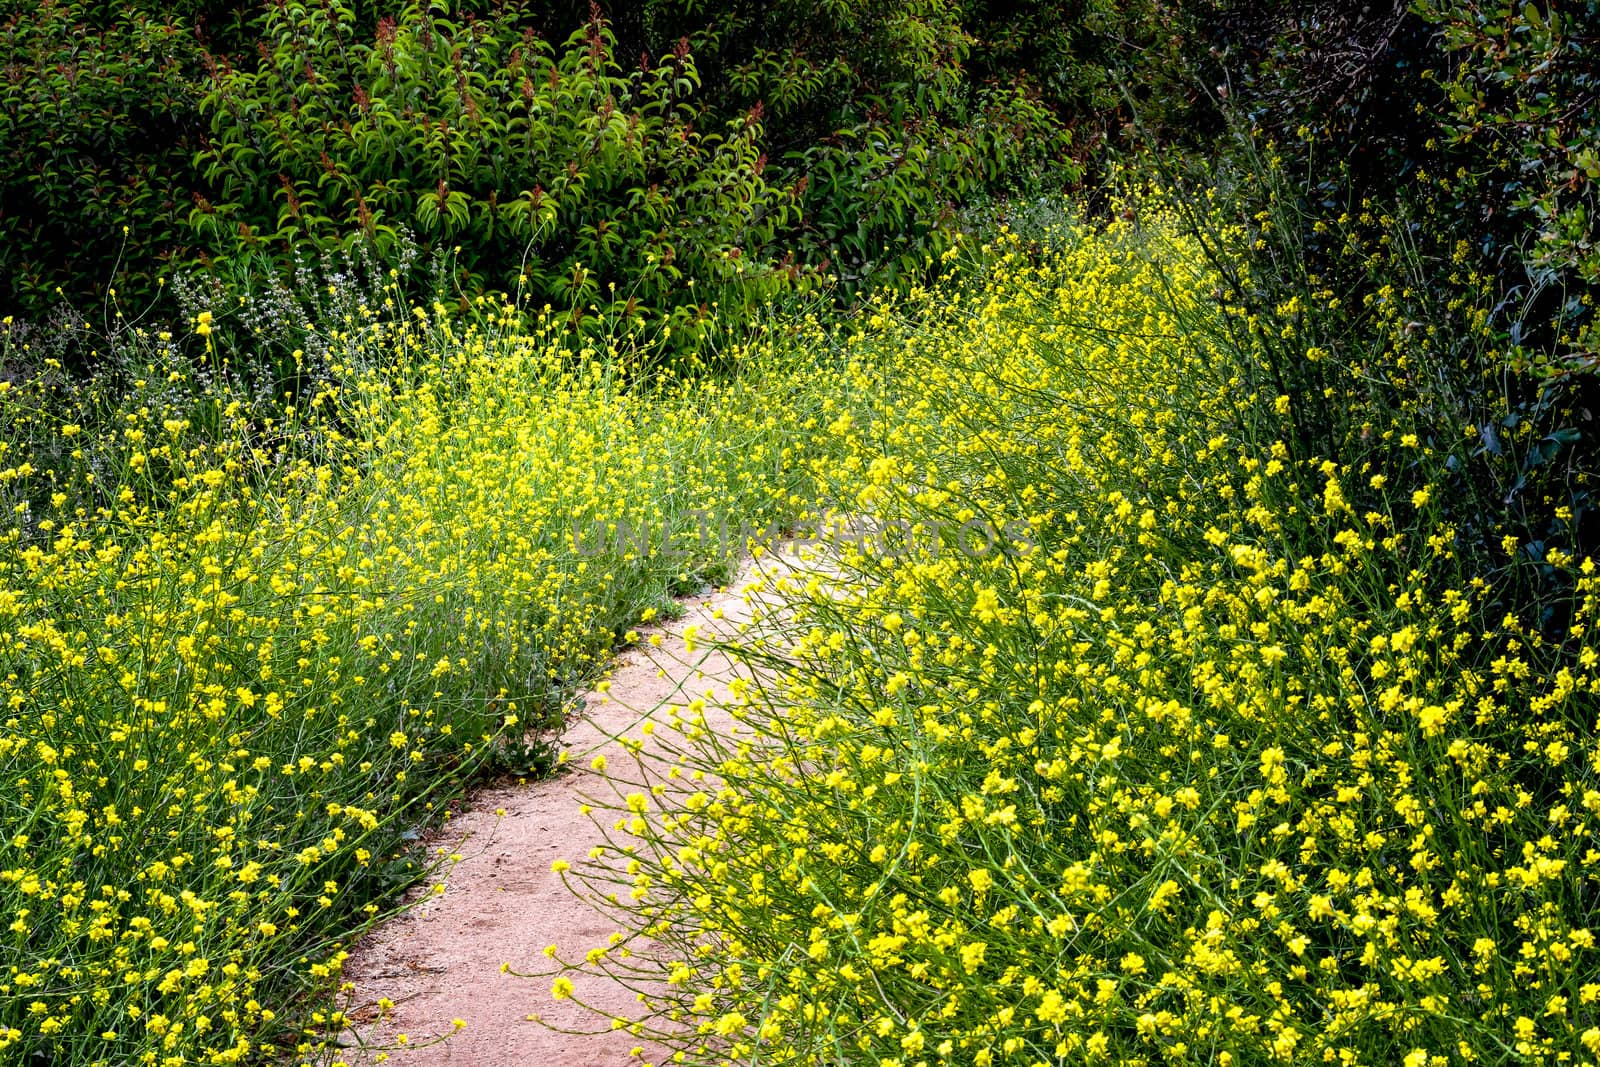 Yellow Mass of Monkey Flowers along the Path at Cherry Canyon Park, California.